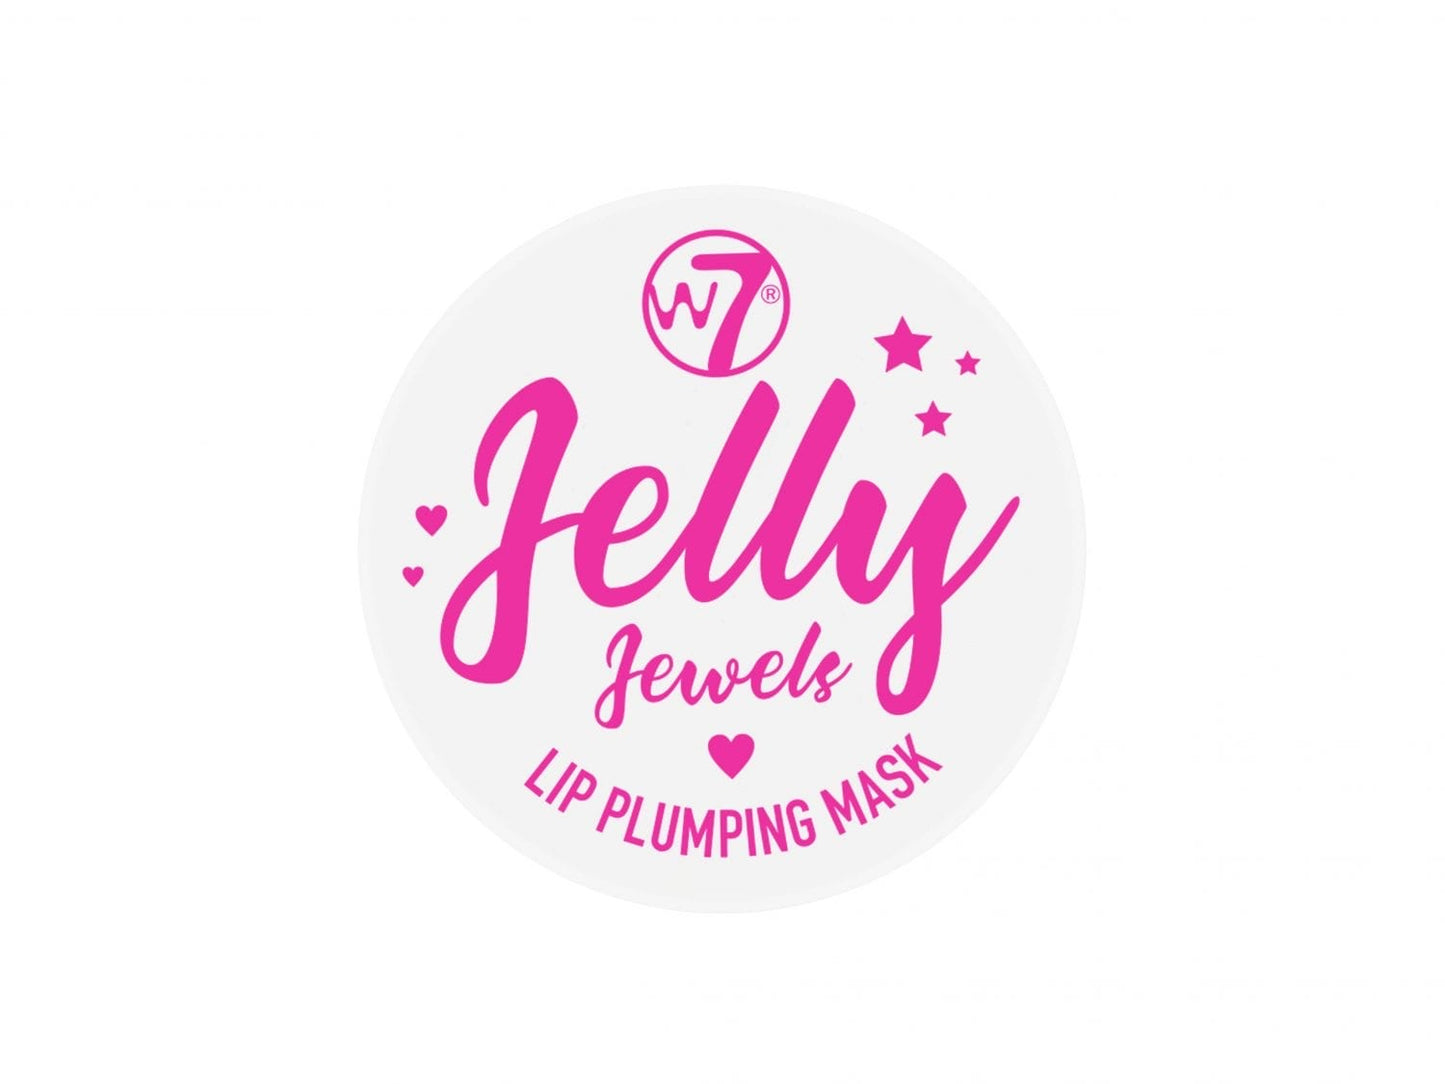 W7 Jelly Jewels Lip Plumping Mask – Gold Lust